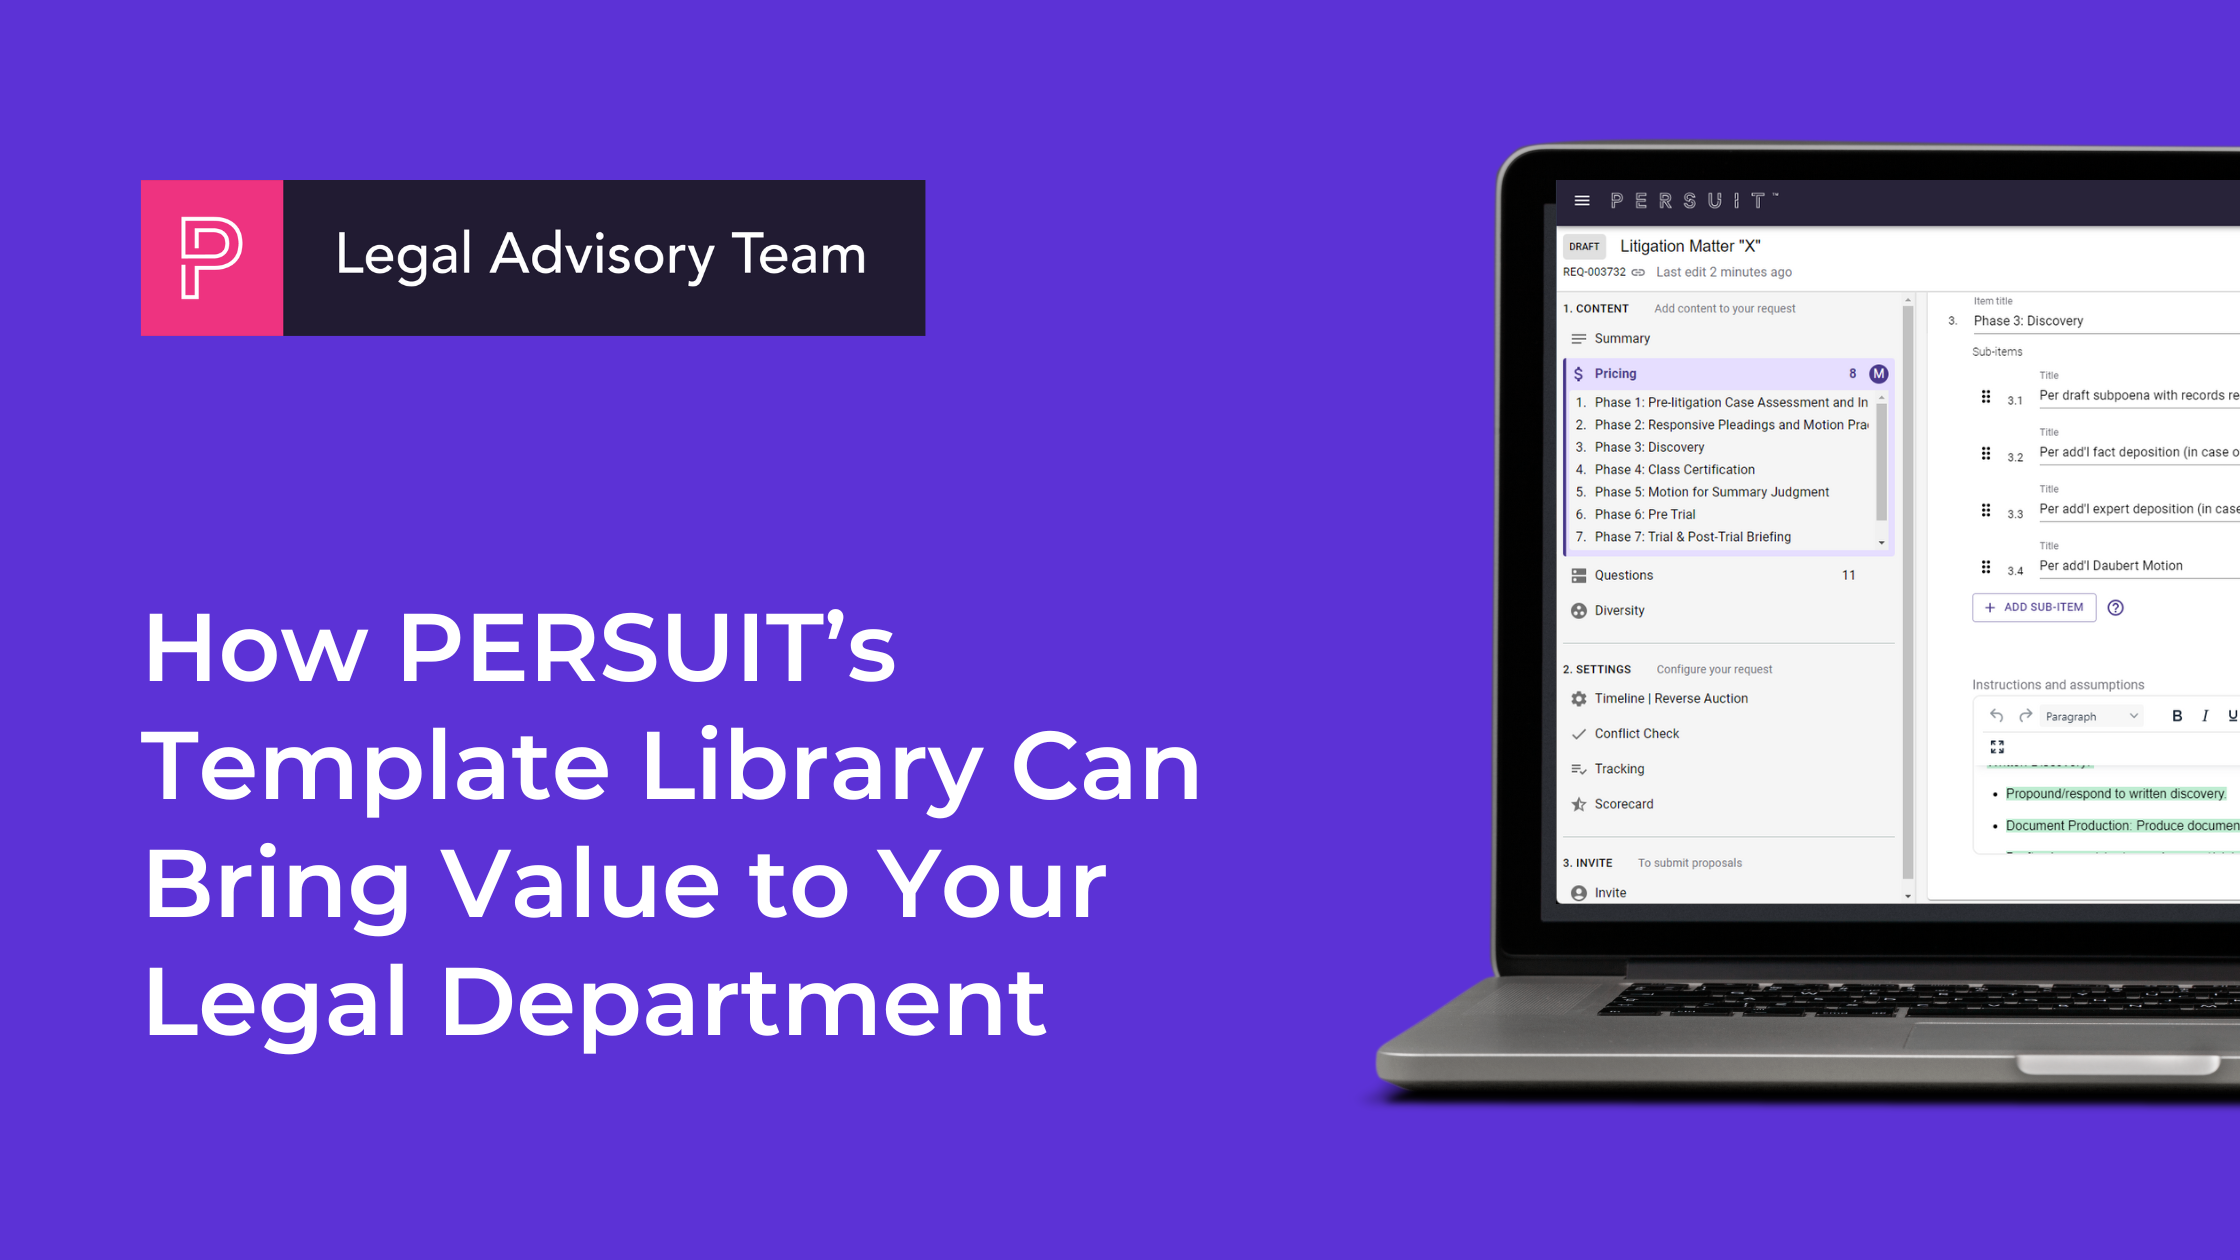 How PERSUIT's Template Library Can Bring Value to Your Legal Department